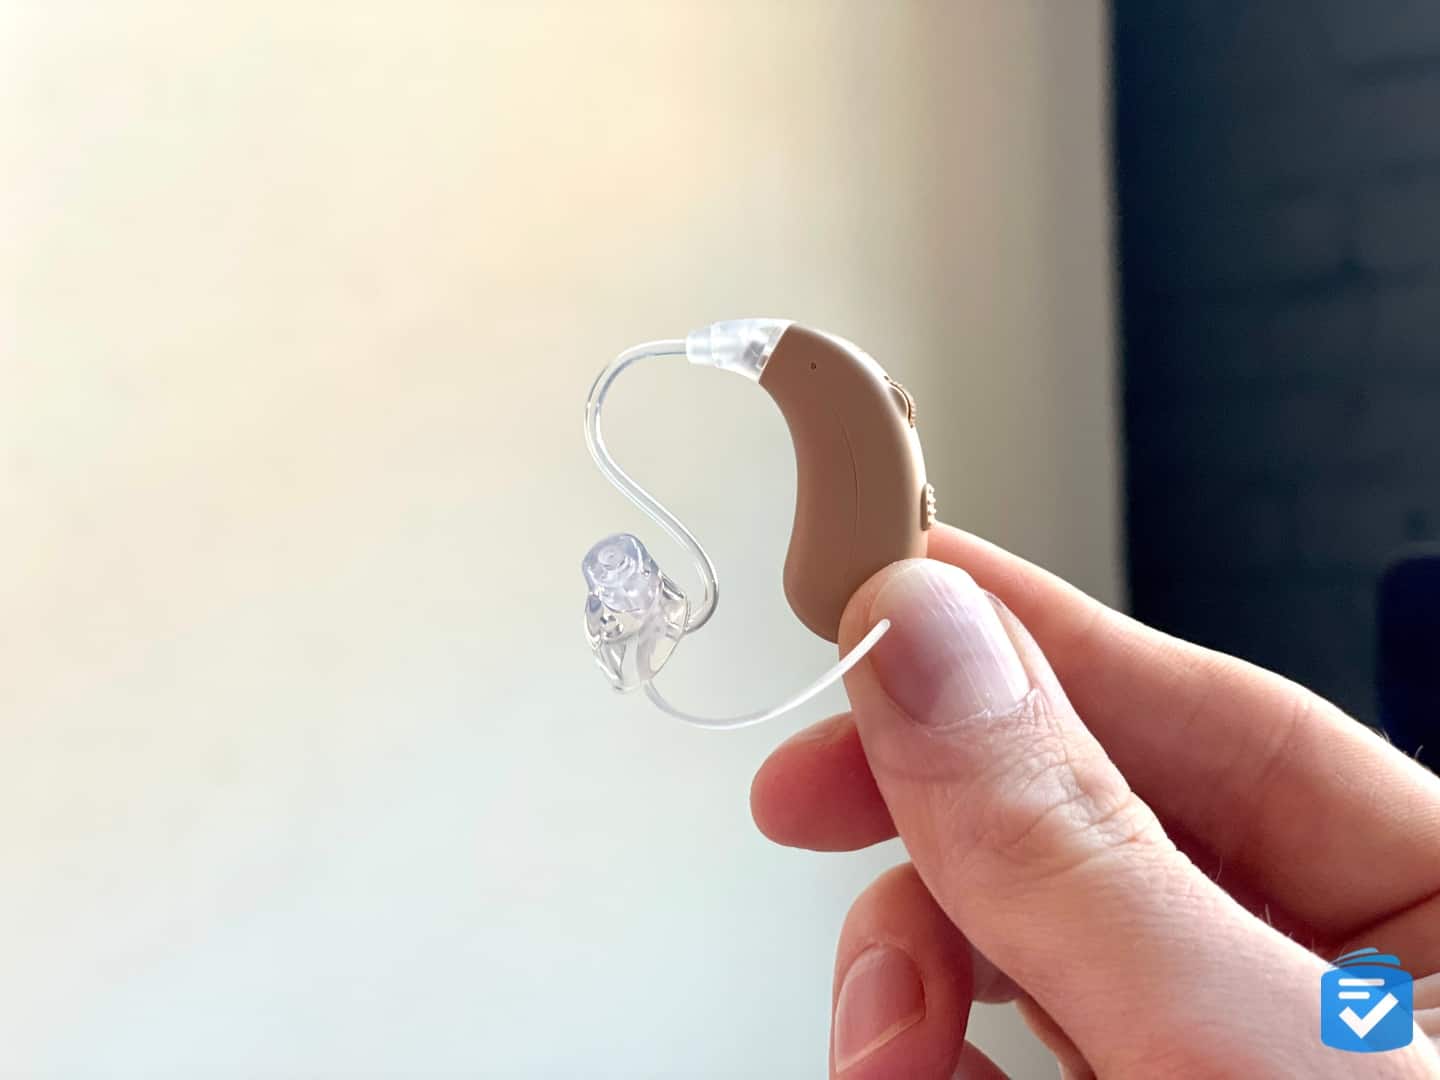 The MDHearing Volt is a behind-the-ear hearing aid.